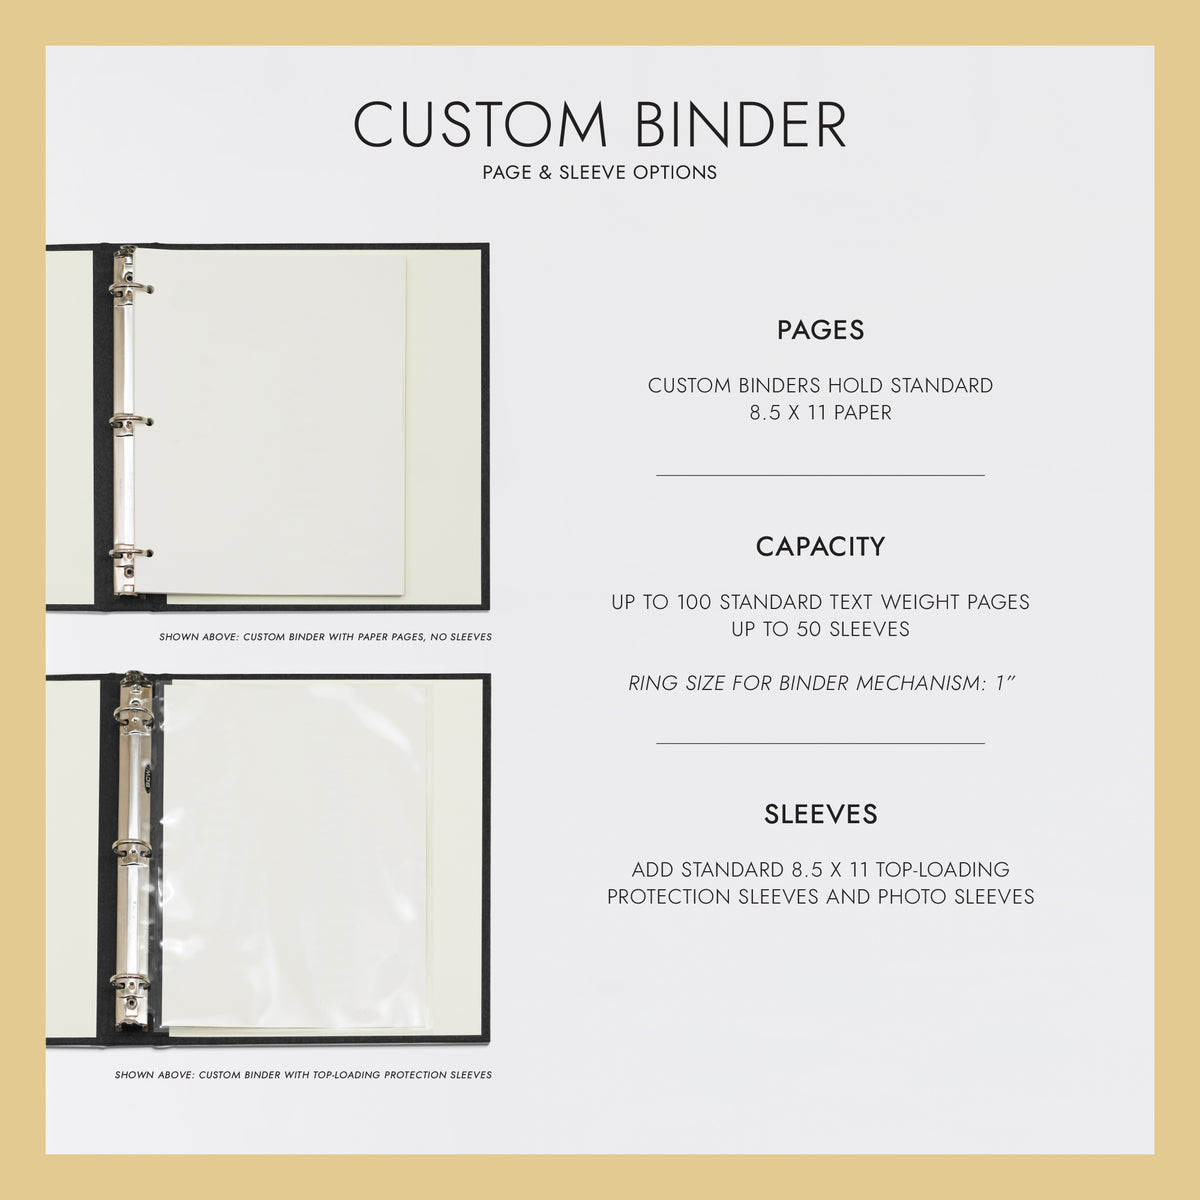 Custom Binder with Natural Linen Cover